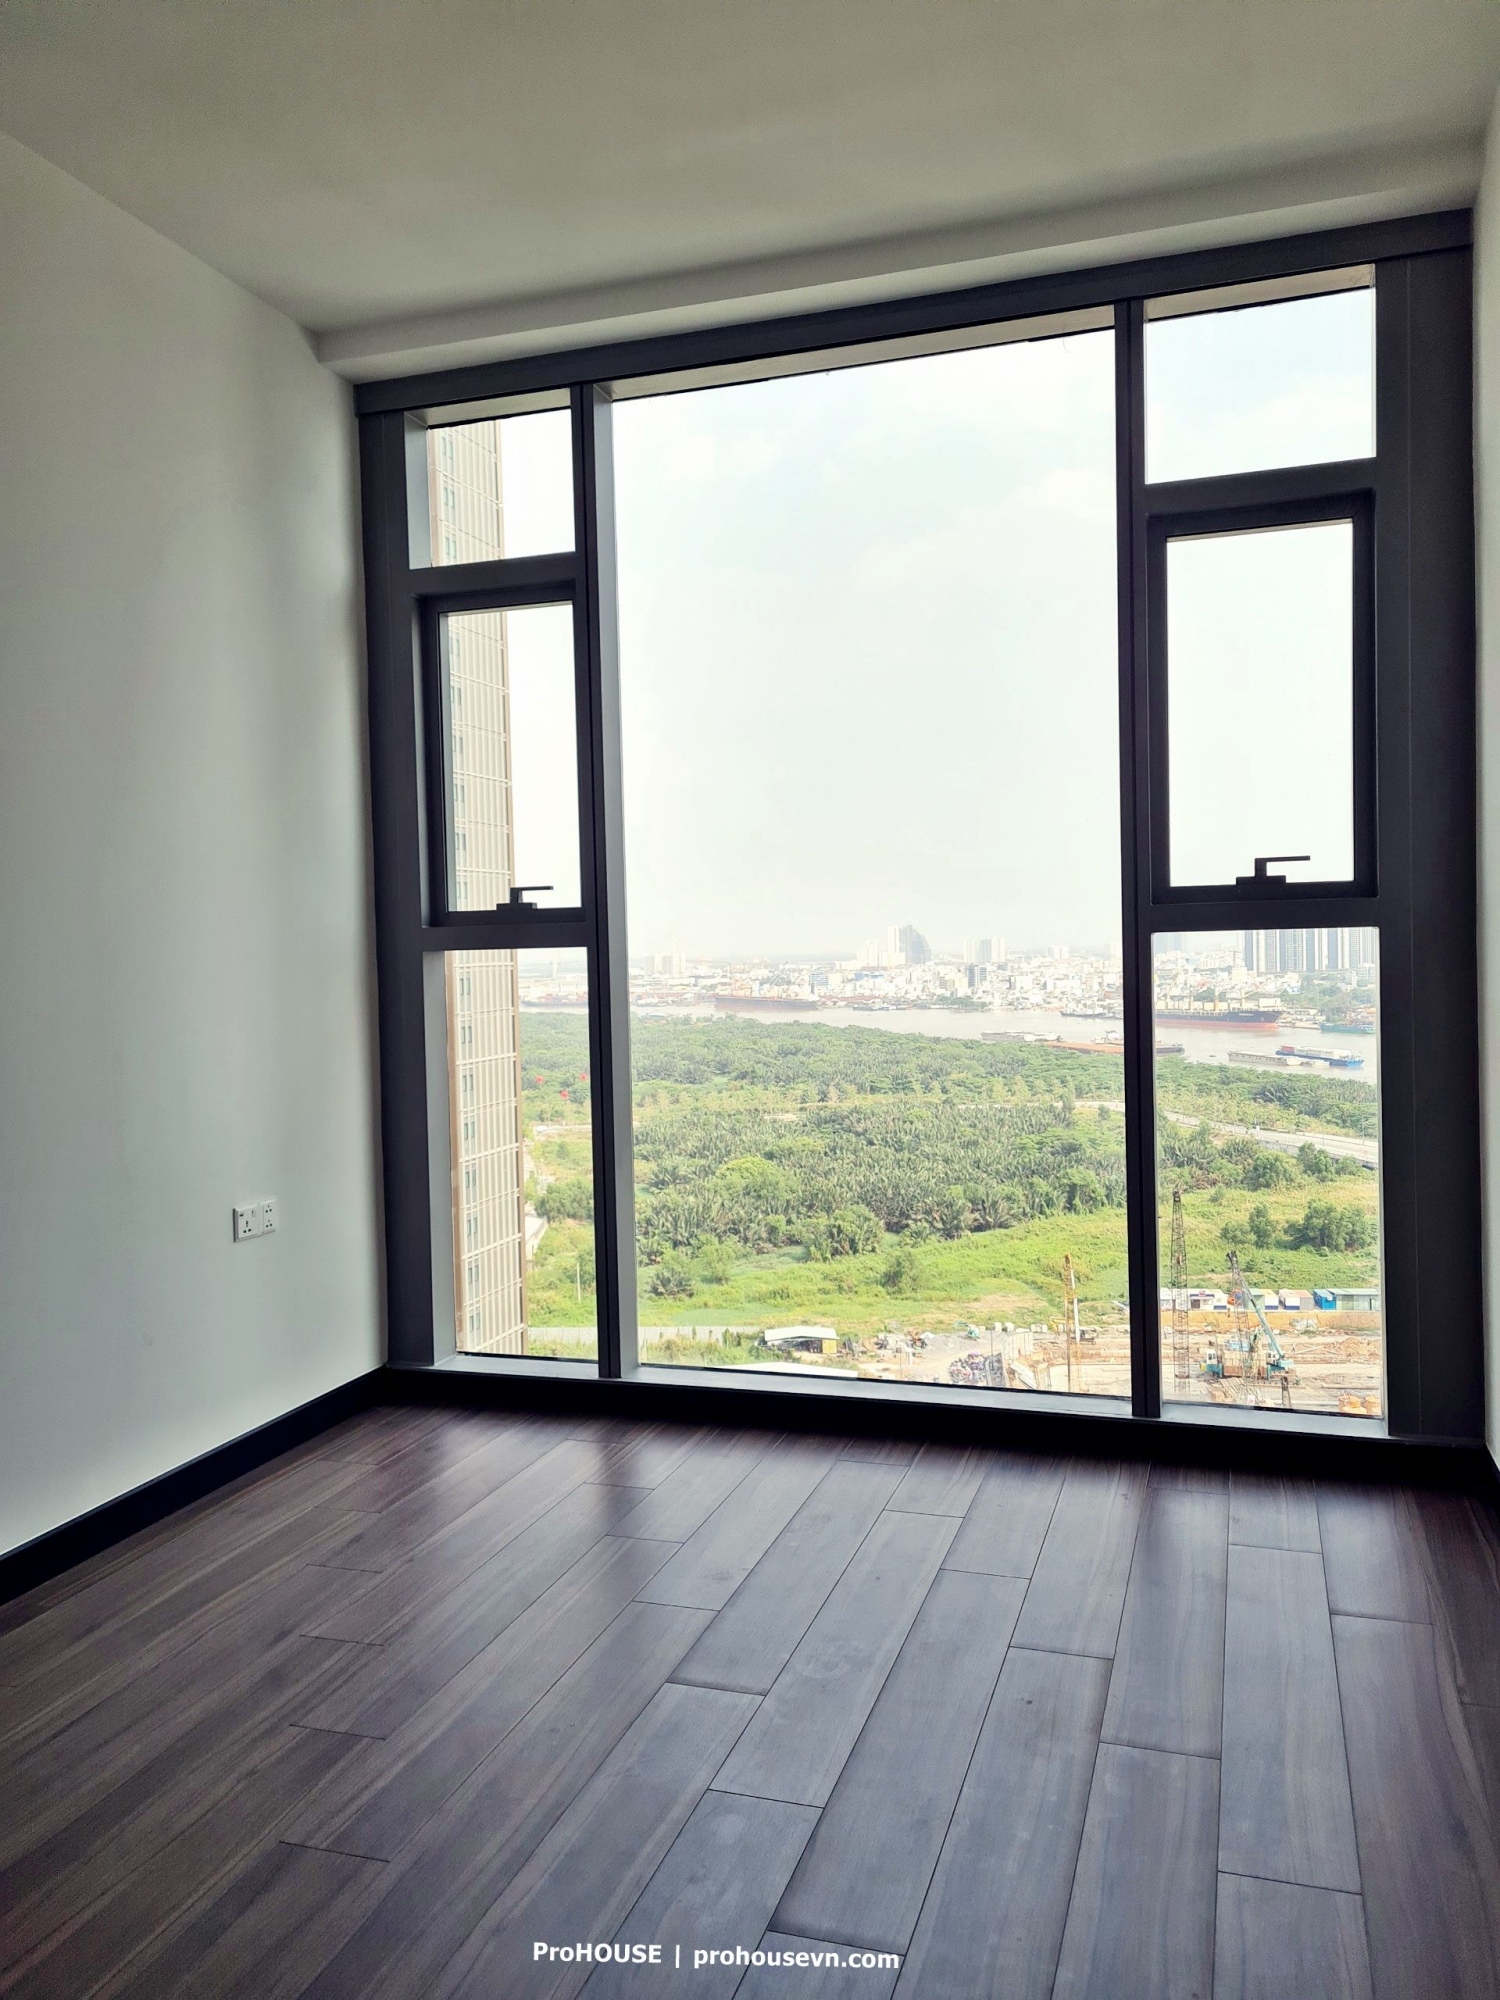 EMPIRE CITY APARTMENT 1BR RIVER VIEW FOR SALE